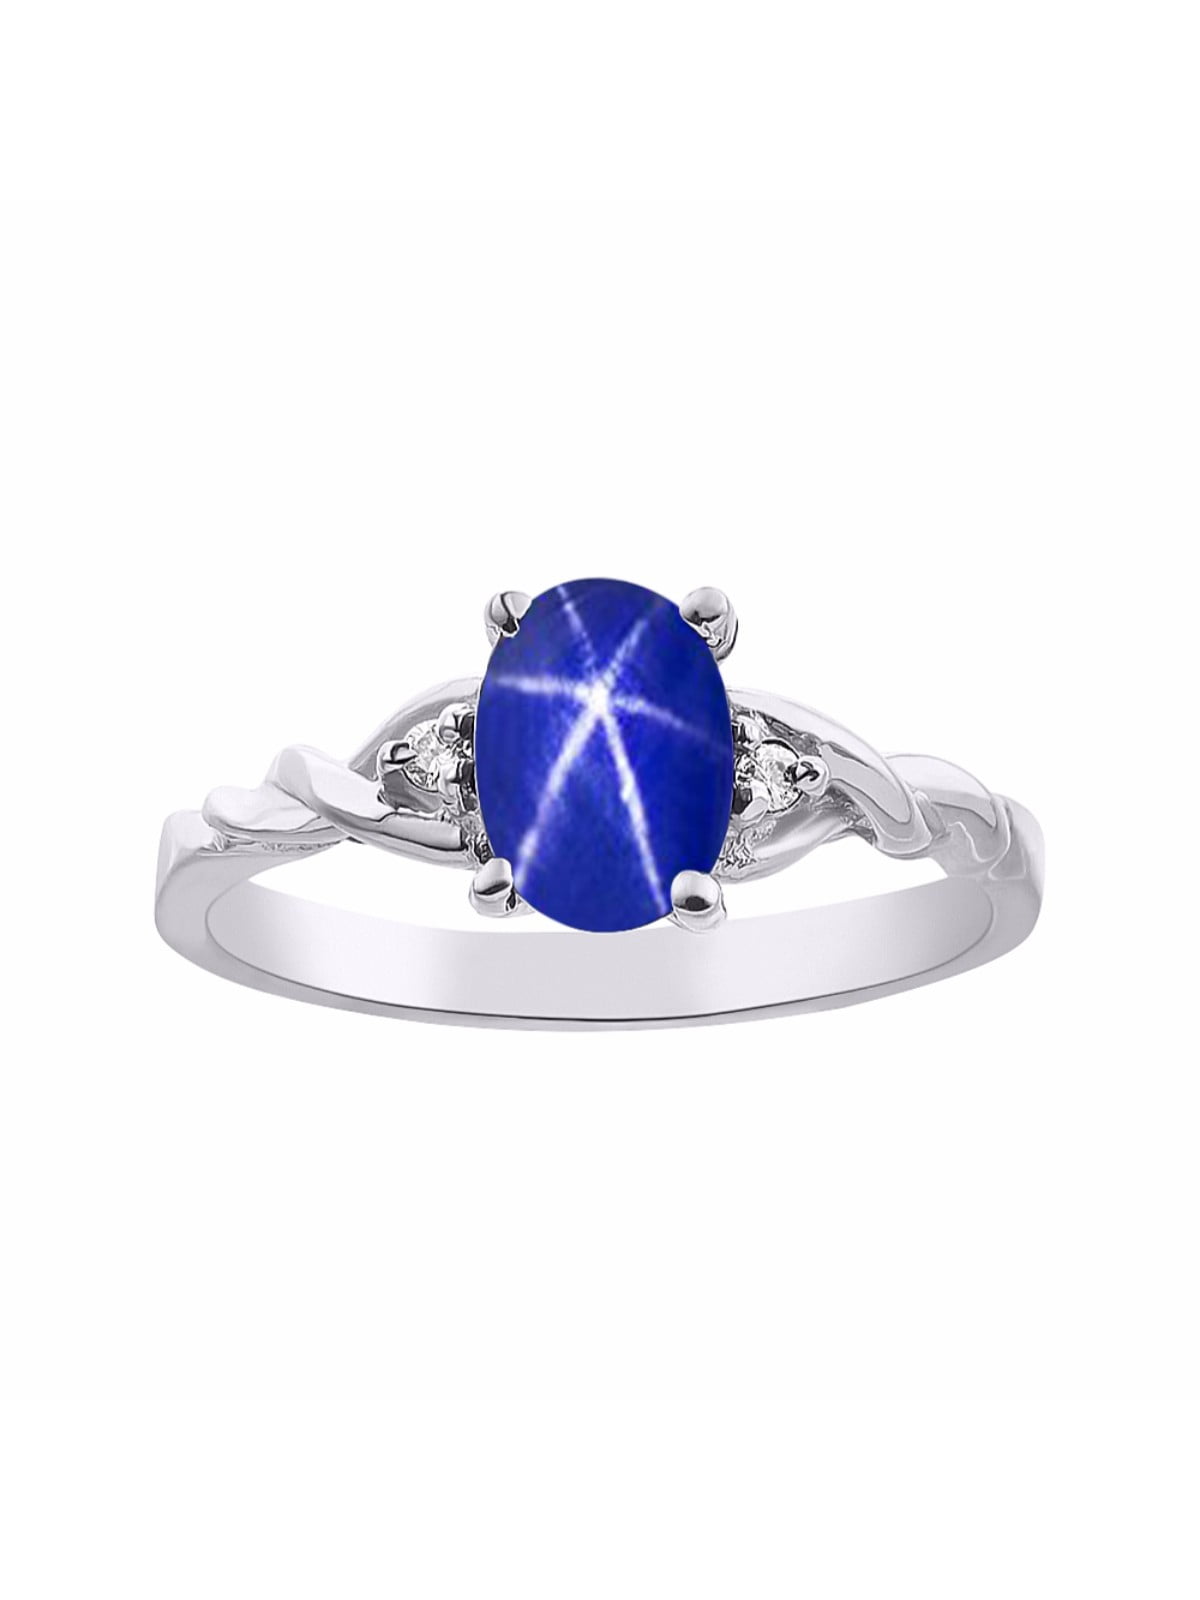 7x5mm Natural AMAZING 6 Ray Blue Star-Sapphire Ring in 925 Silver #35400 